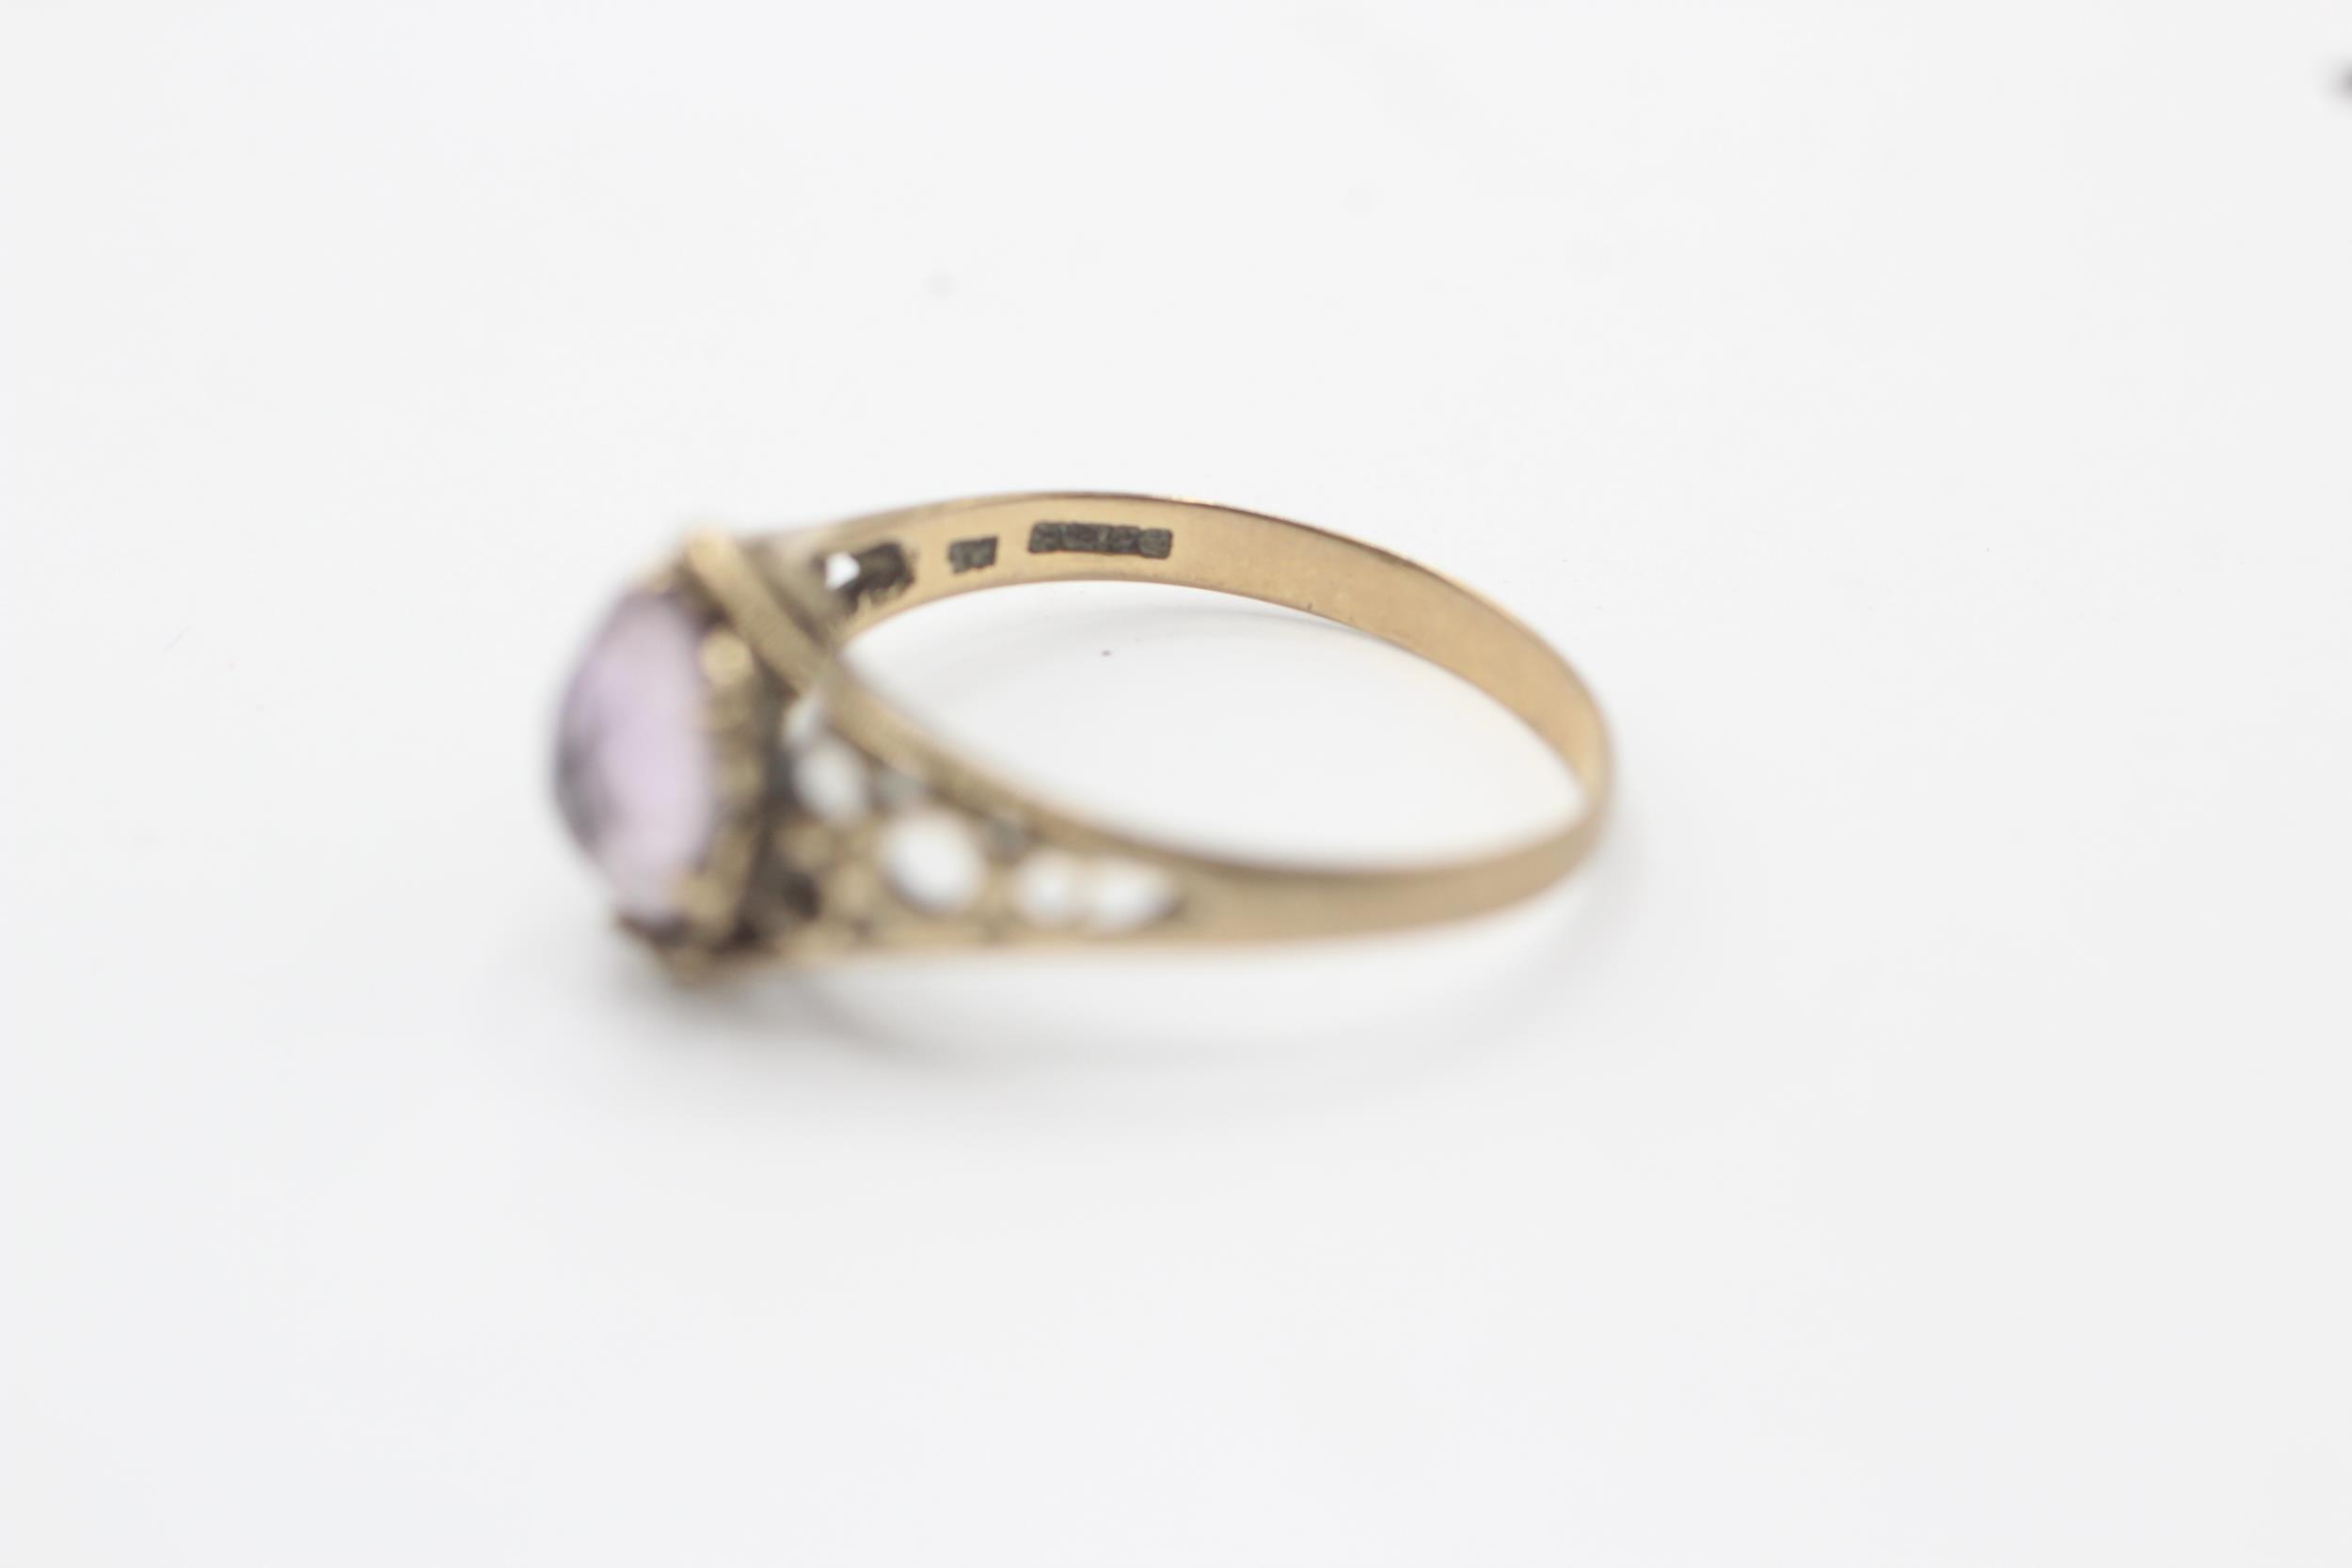 9ct gold amethyst single stone ring with openwork shank Size O 1/2 1.6 g - Image 3 of 7